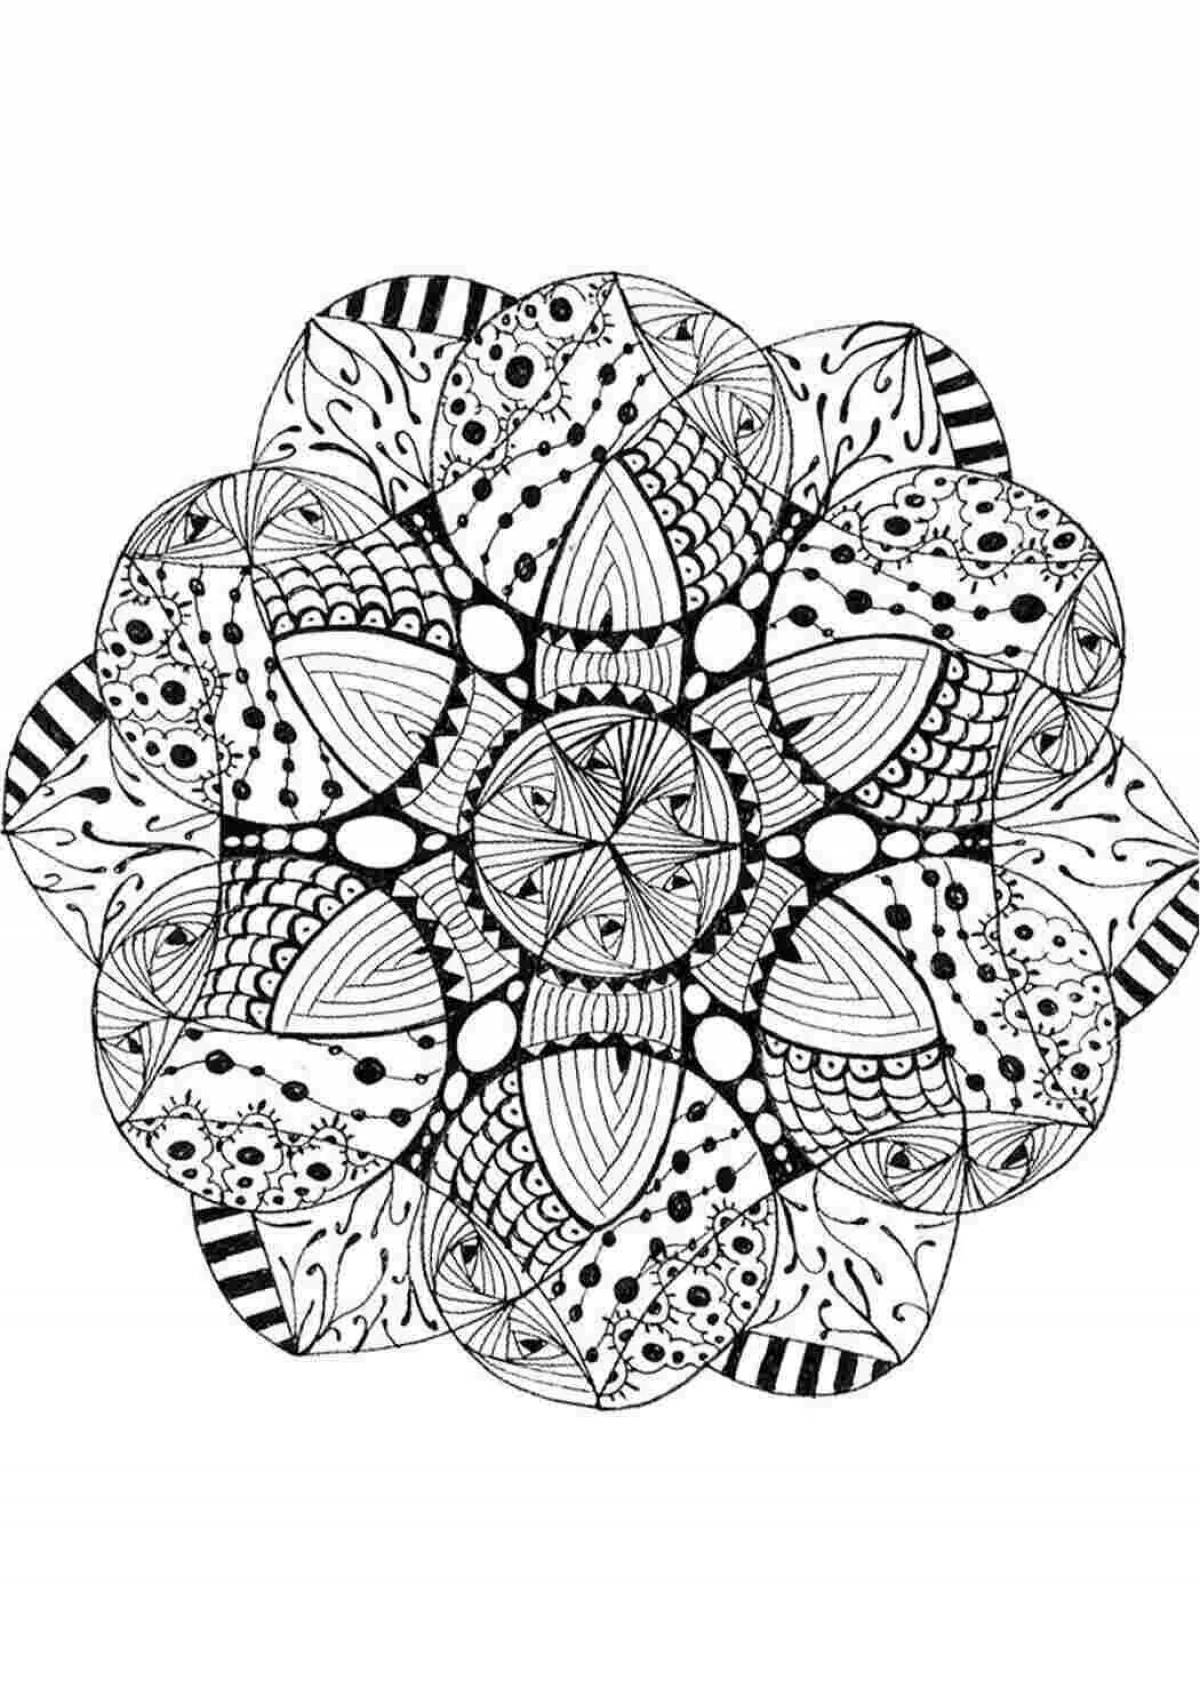 Soothing Art Therapy Coloring Pages for Adults